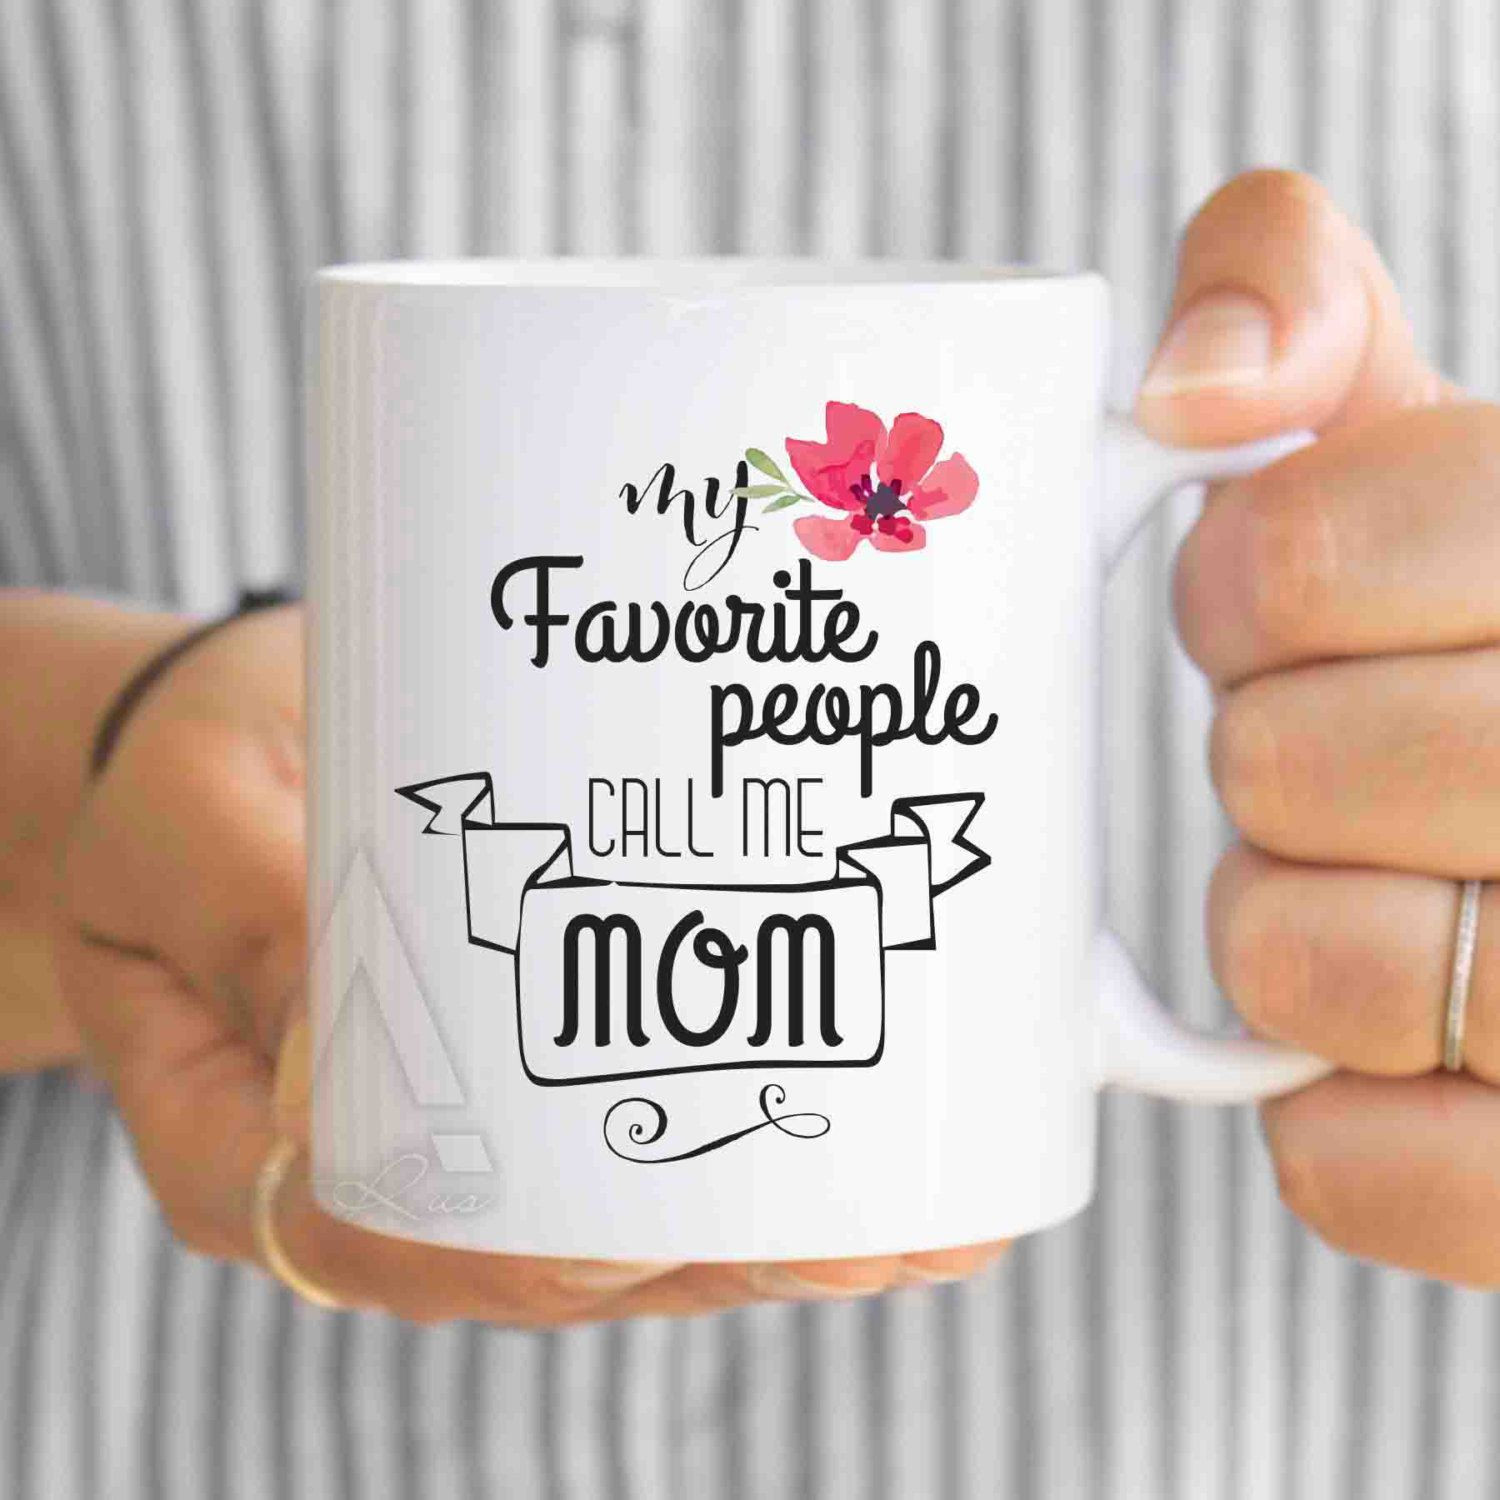 Mom Birthday Gift Ideas From Son
 christmas ts for mom mom son t "My favorite people